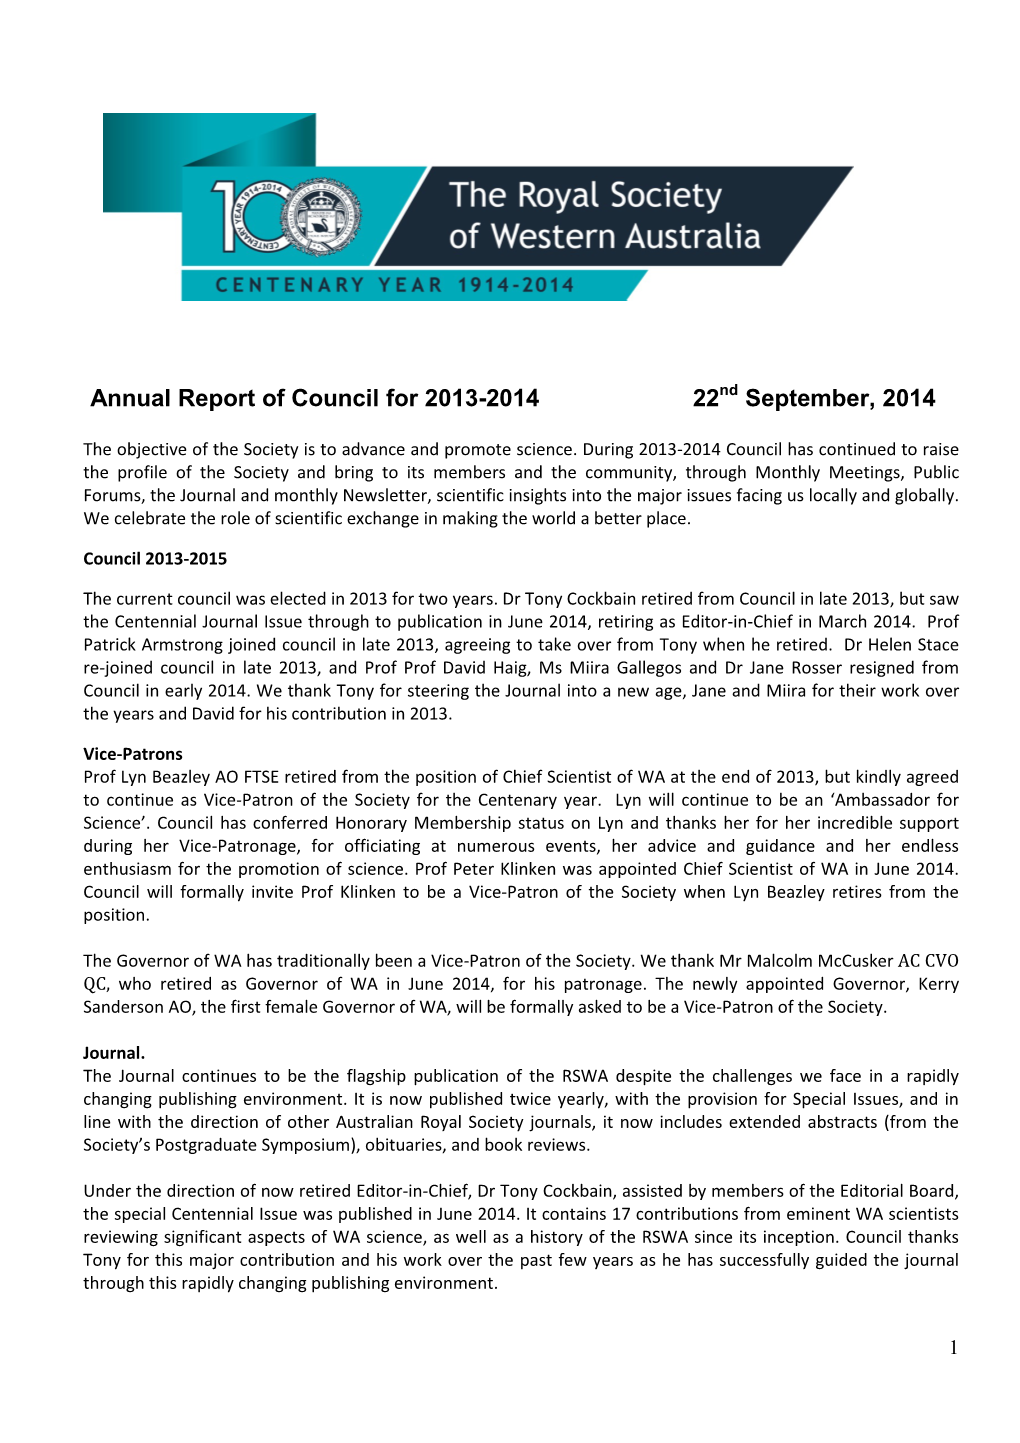 Annual Report of Council for 2013-2014 22 September, 2014